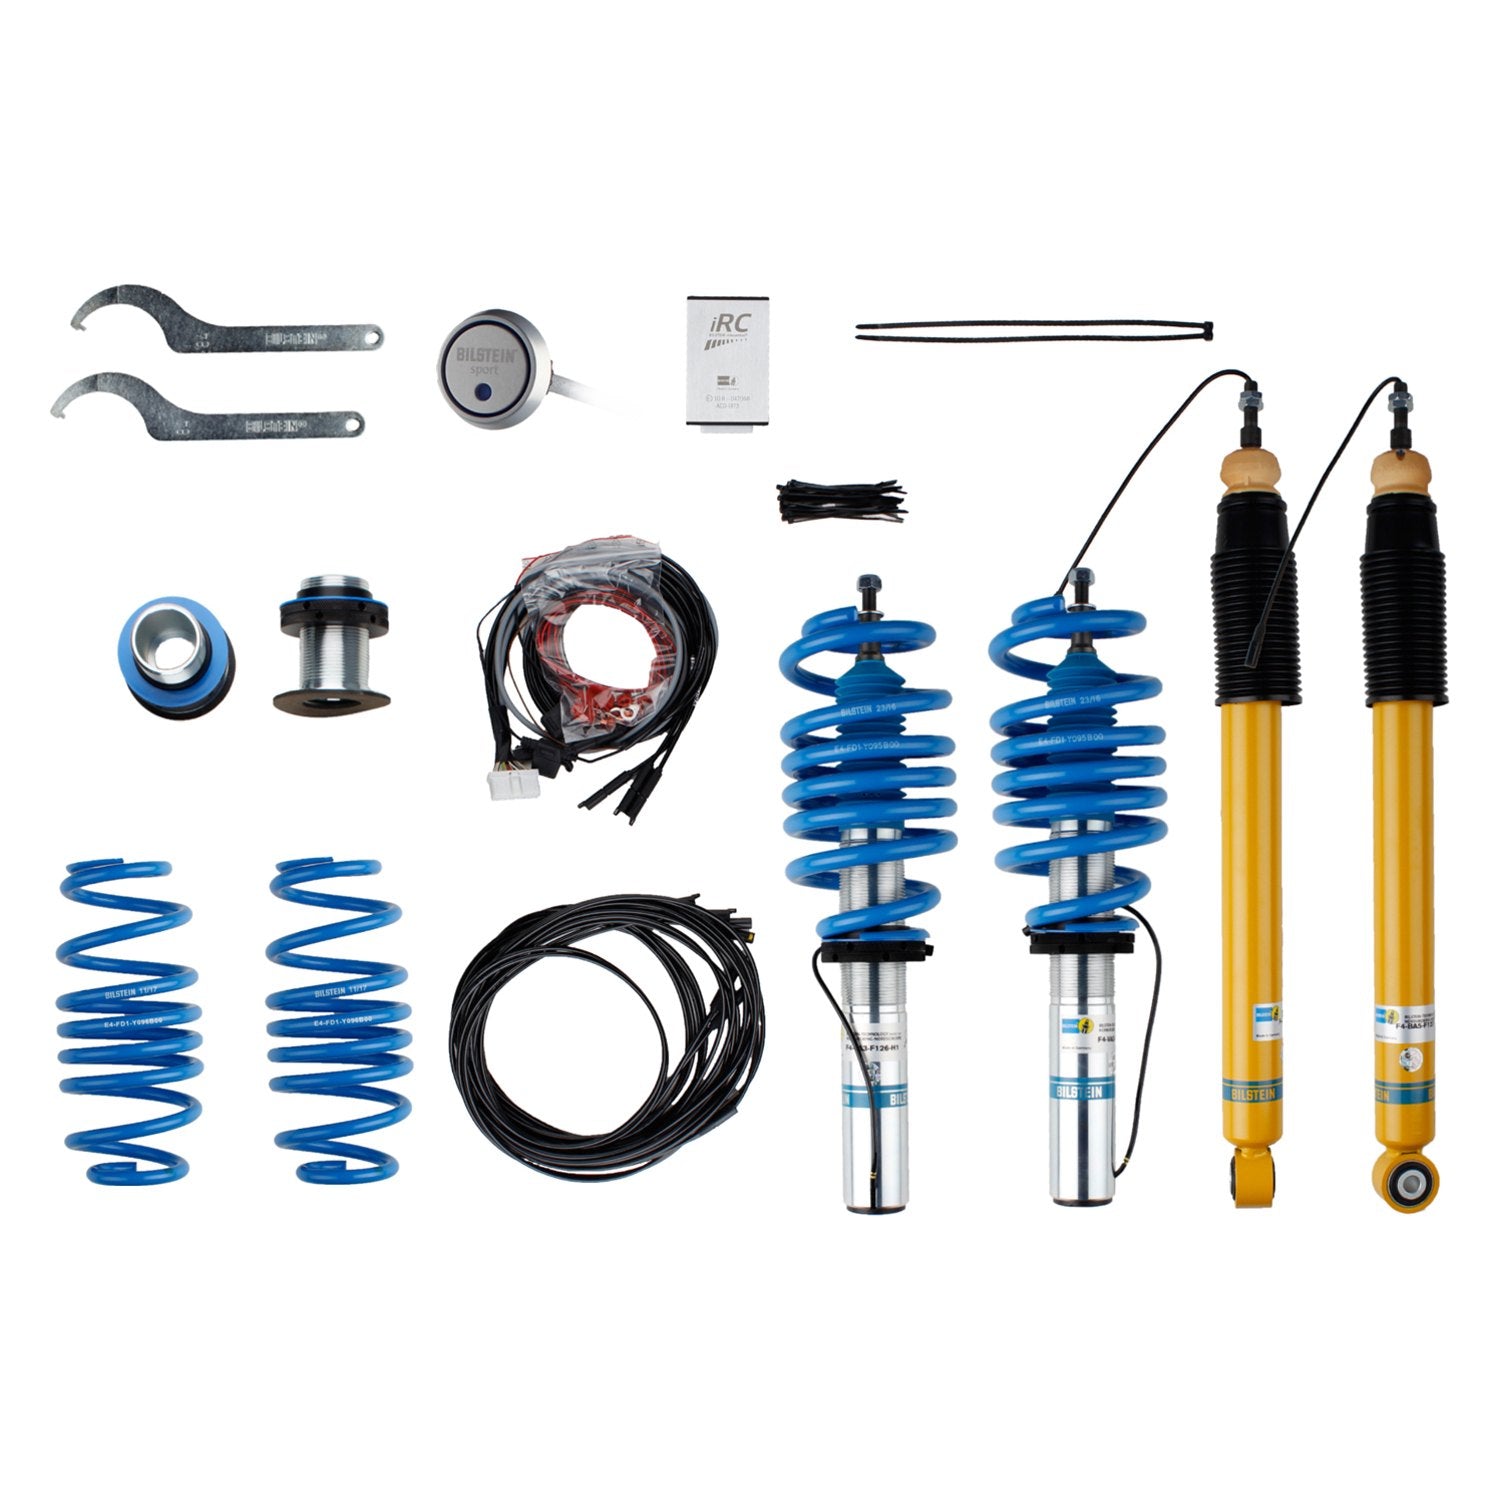 Audi Bilstein - 0.8"-2" x 1.2"-2" B16 Series iRC Front and Rear Lowering Coilover Kit - 49-250534